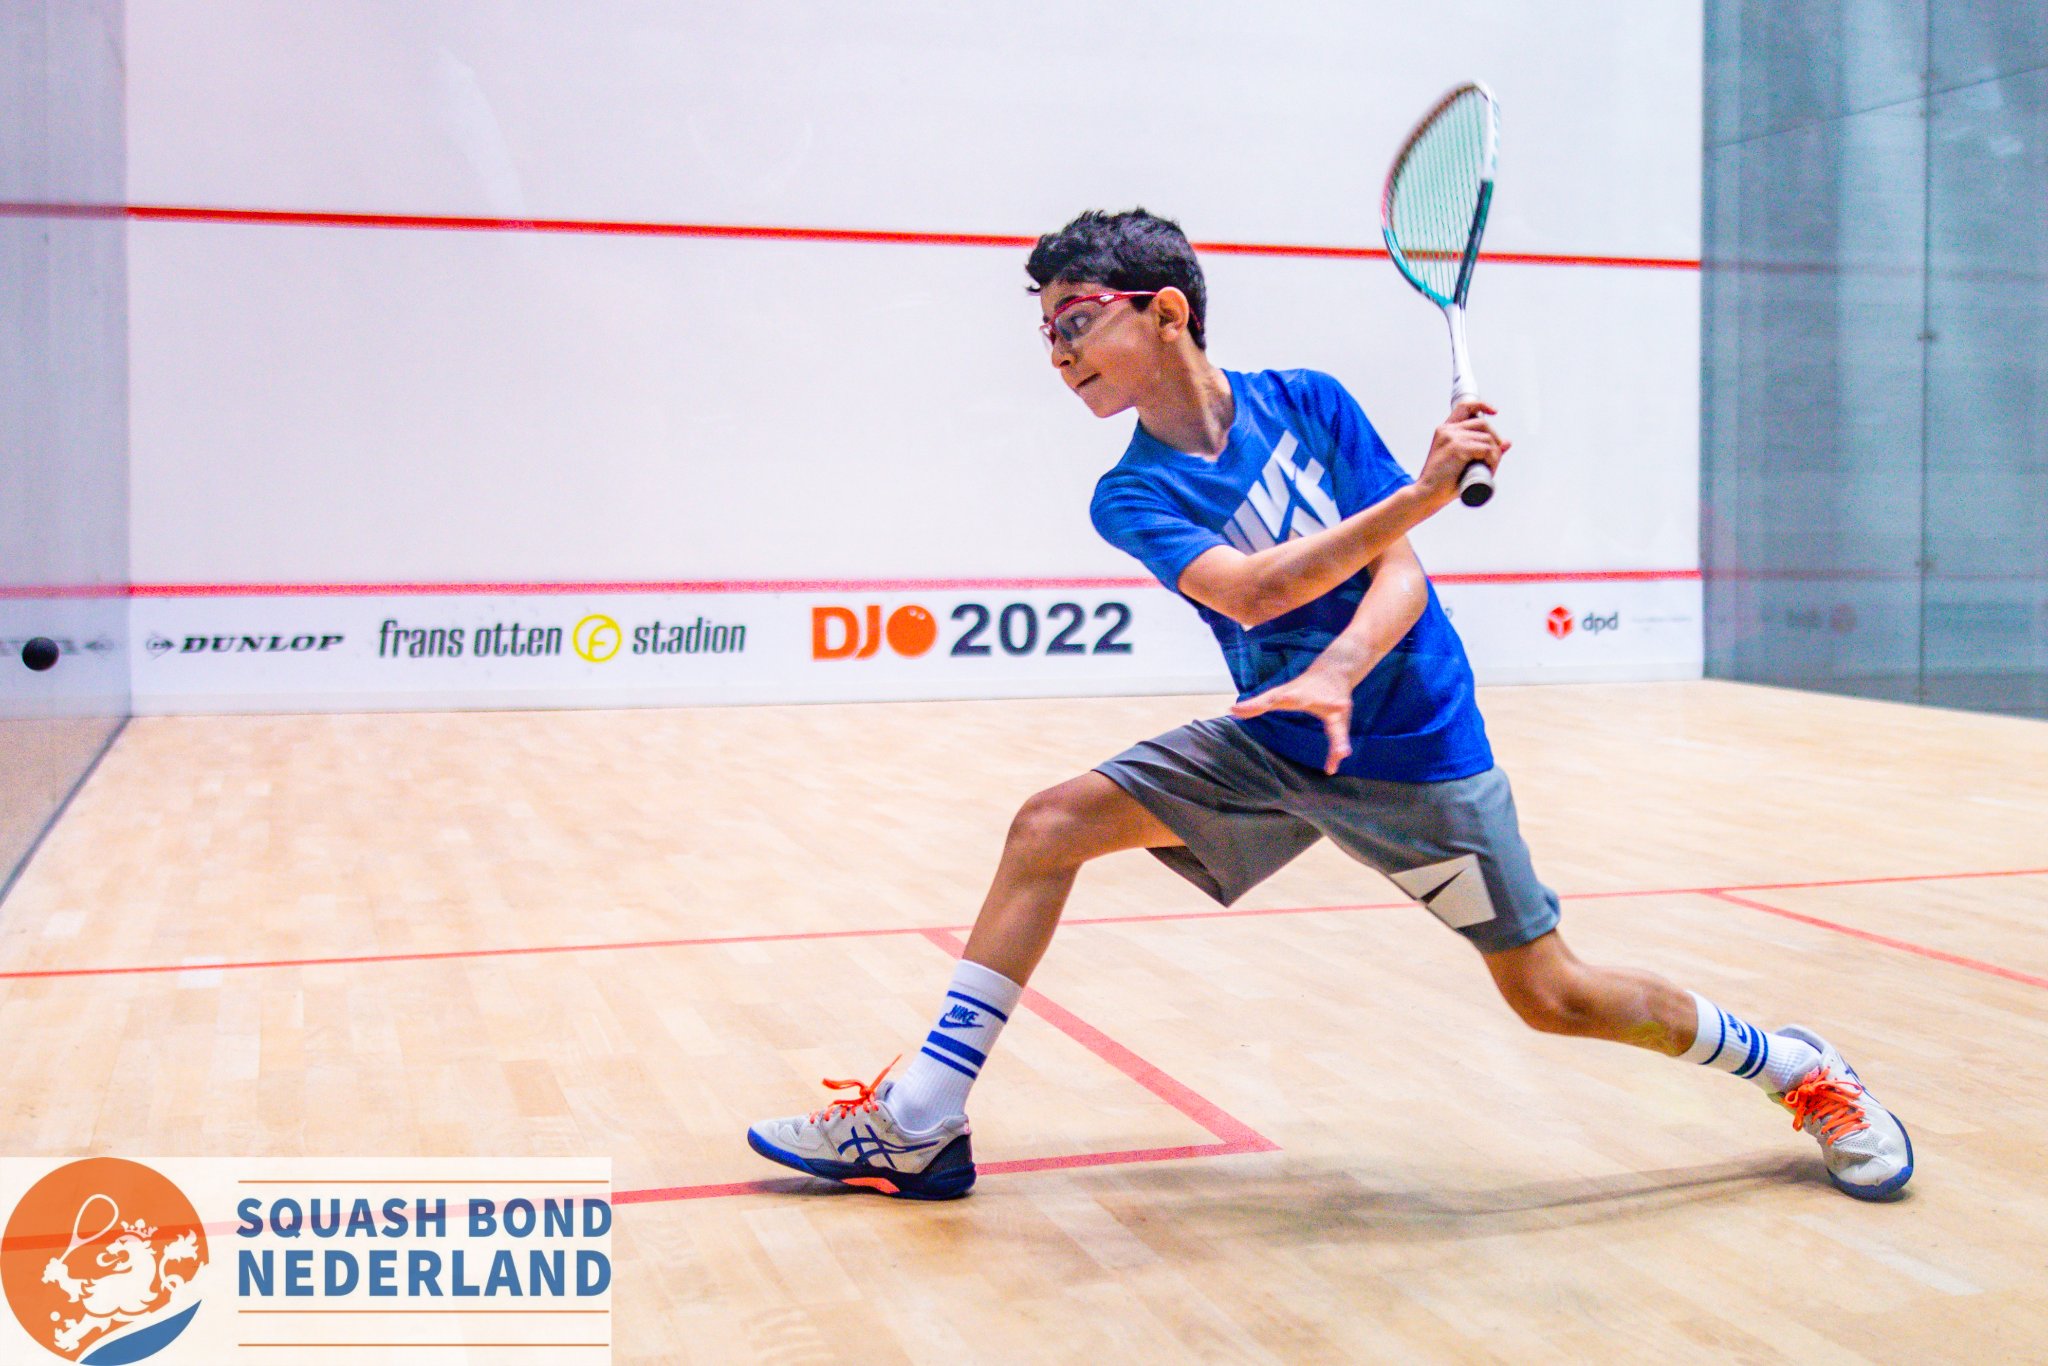 International youth prepares for the Dutch Junior Open finals